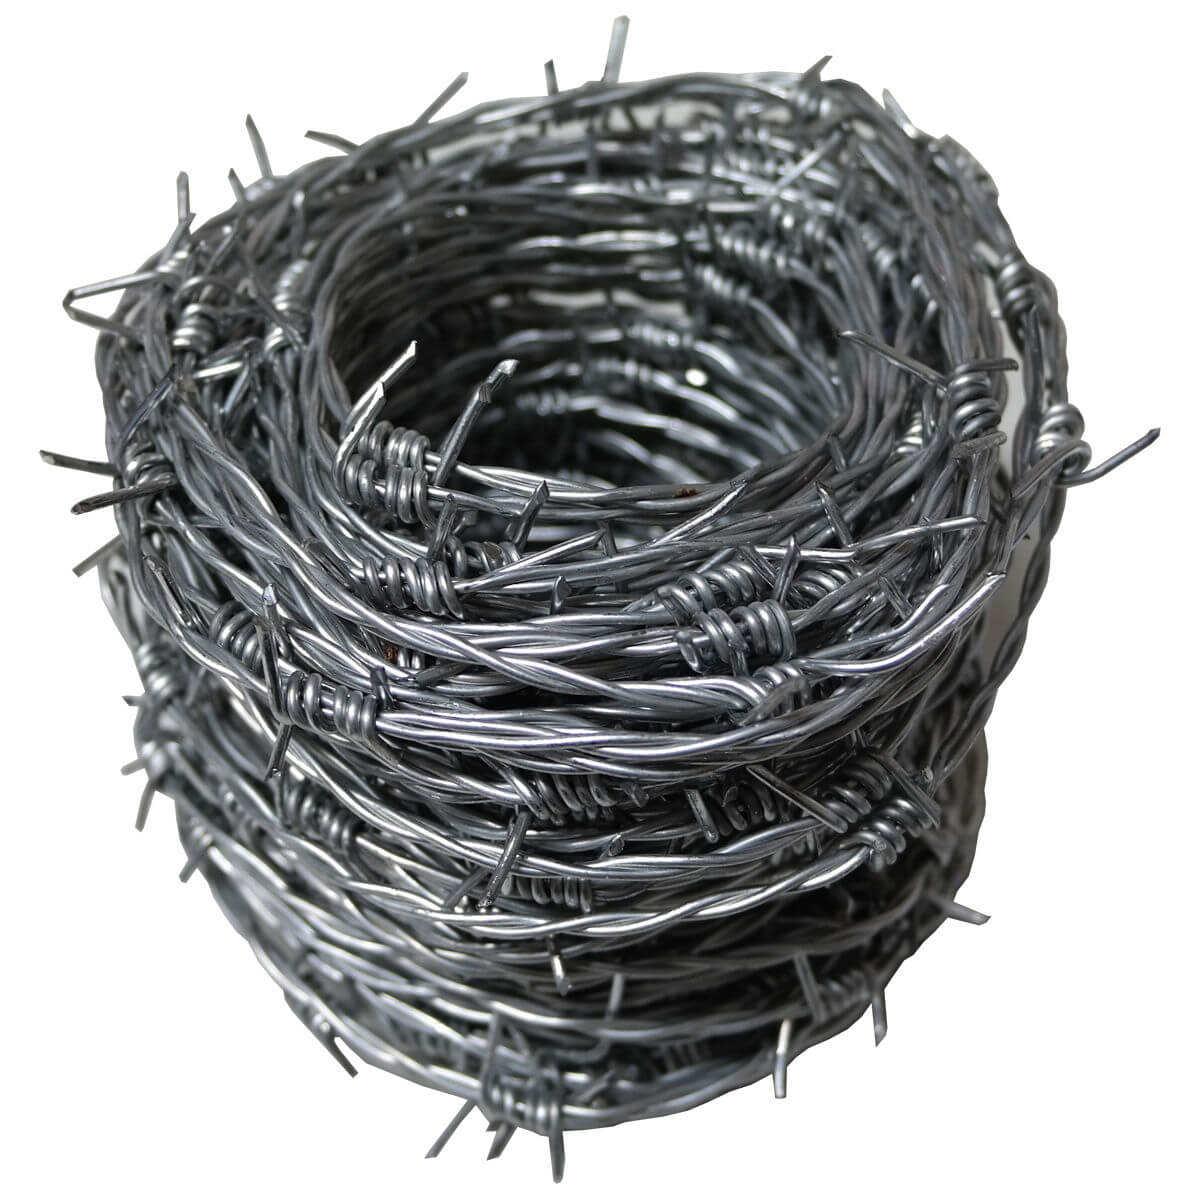 Long-lasting barbed wire: The perfect choice for fencing